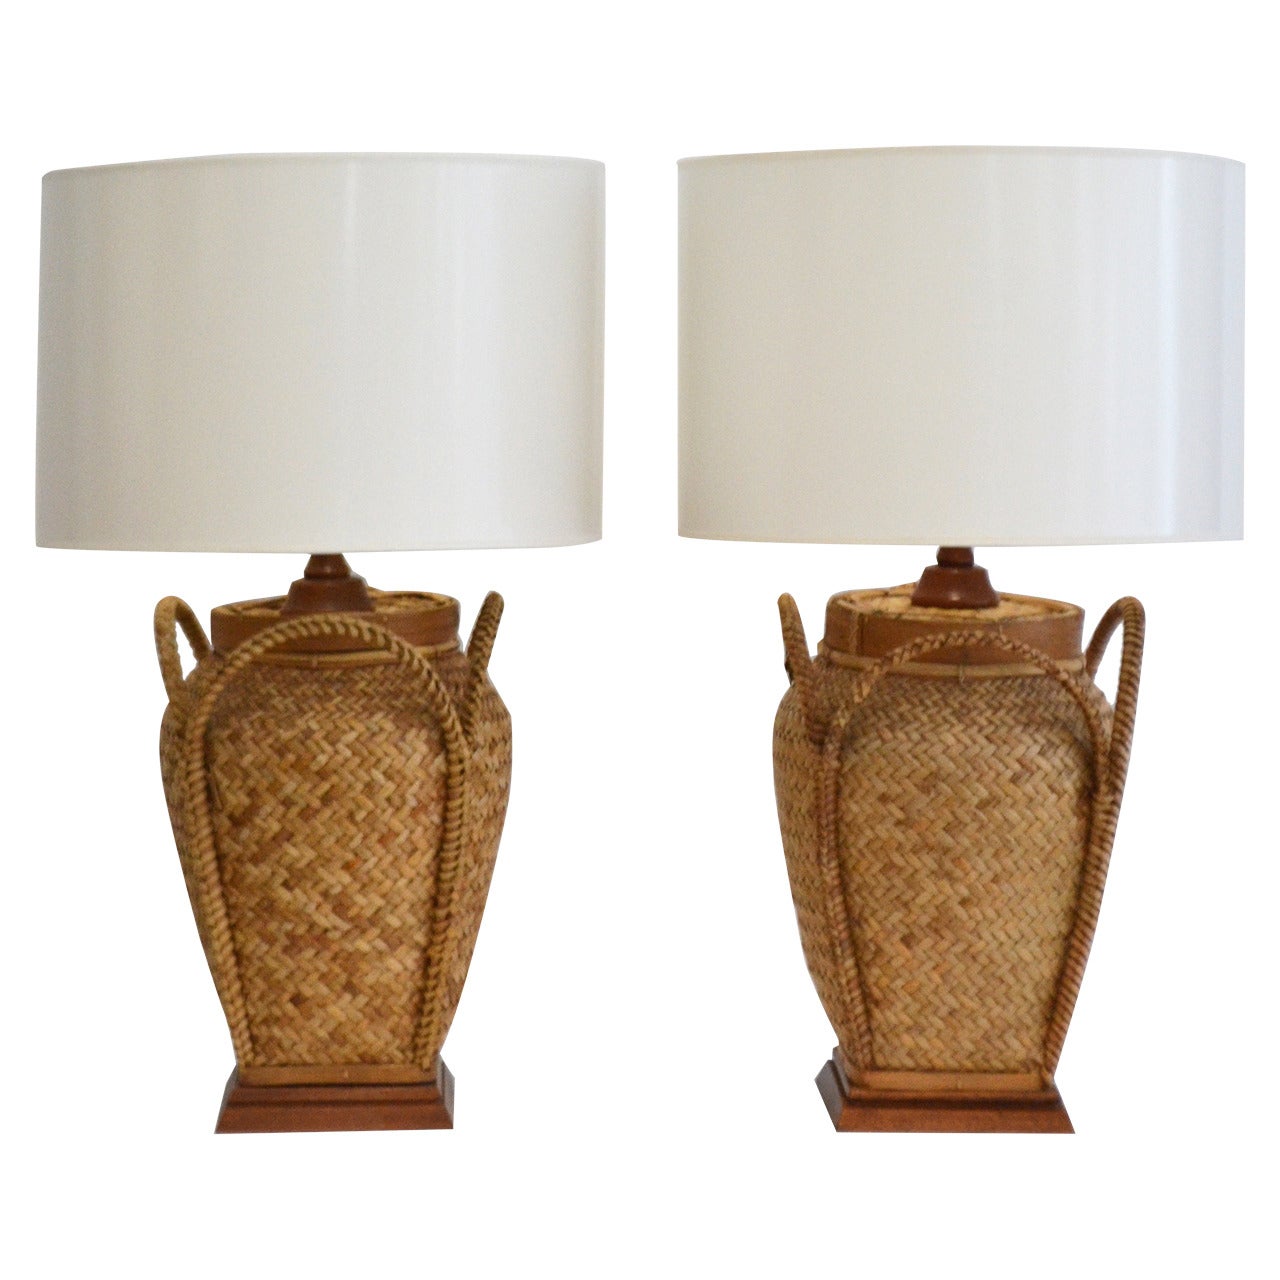 Pair of Woven Rattan Basket Table Lamps